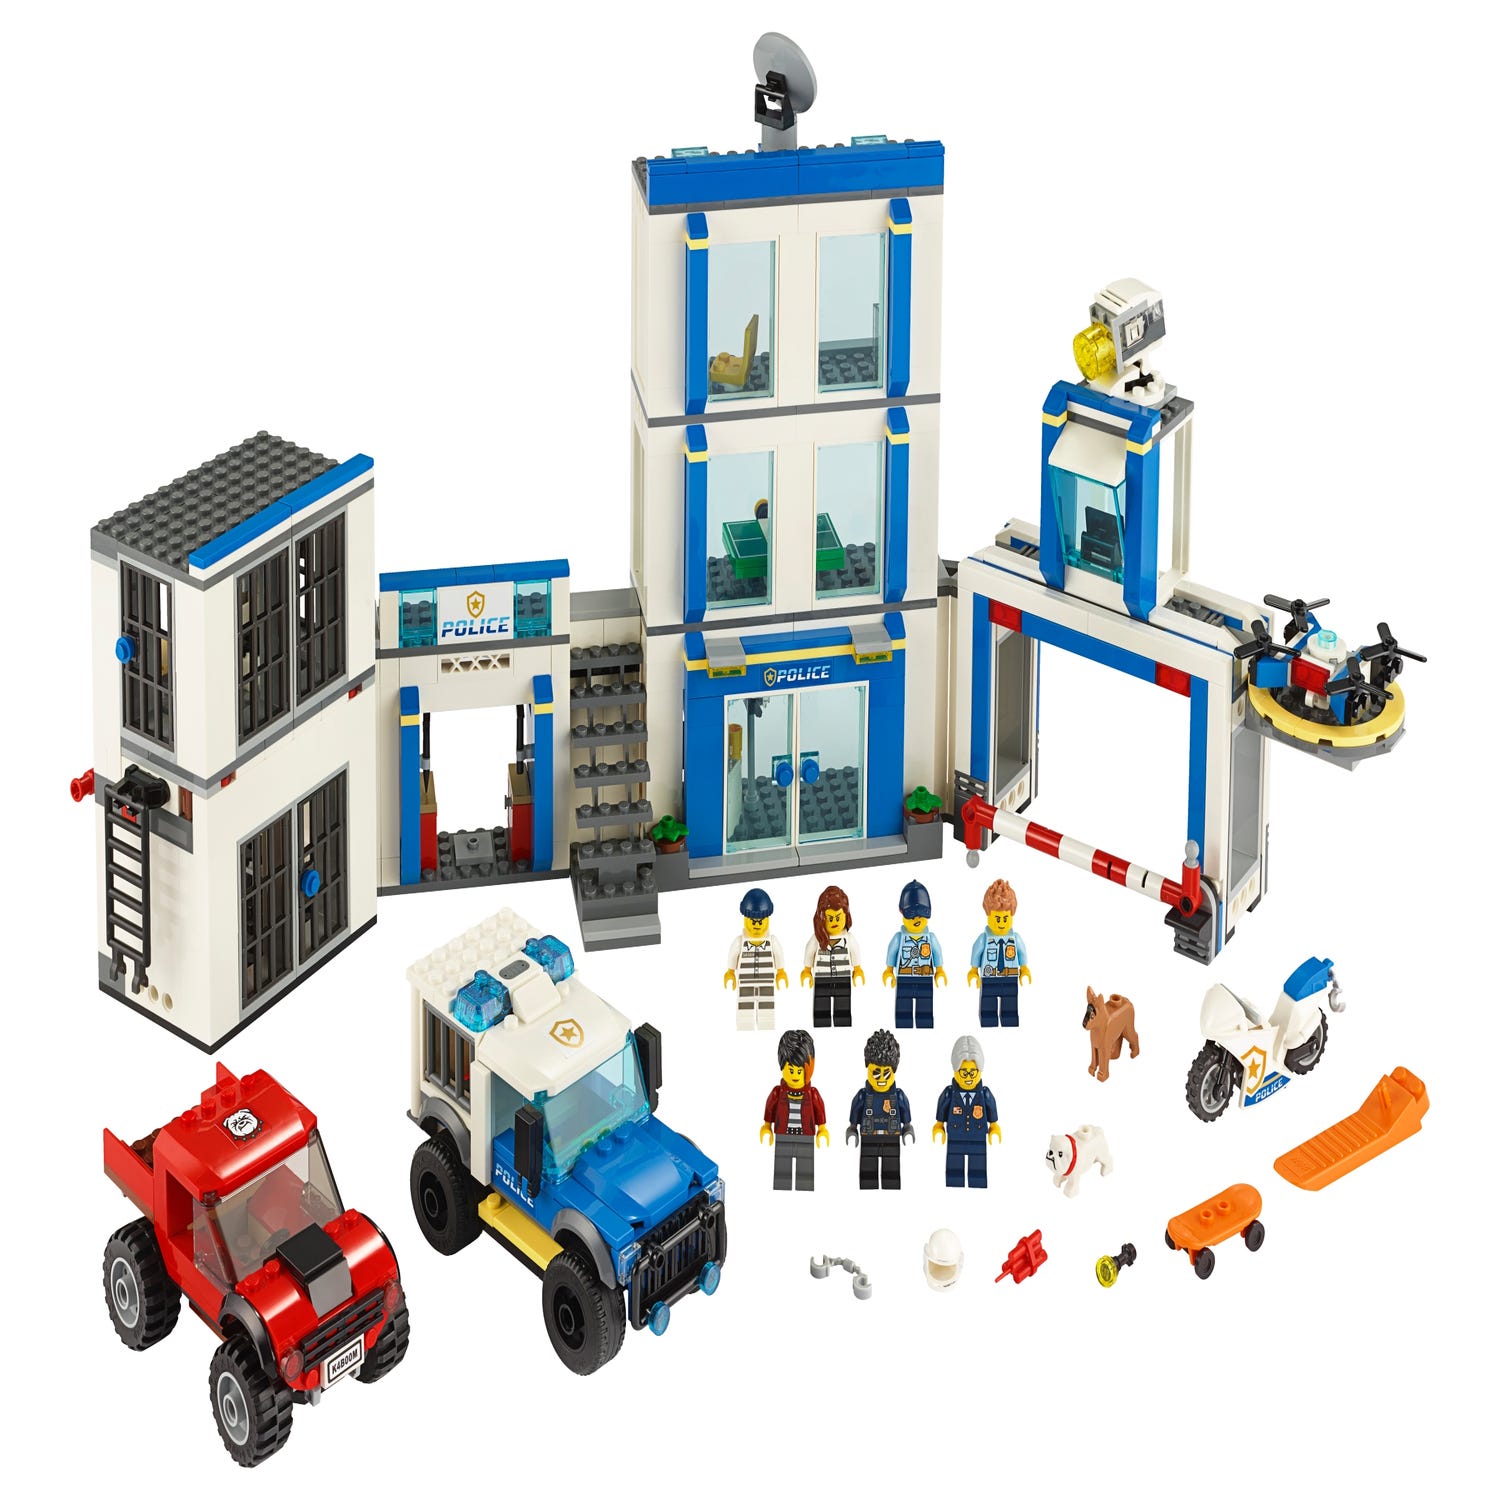 Station 60246 | City | at the Official LEGO® Shop US